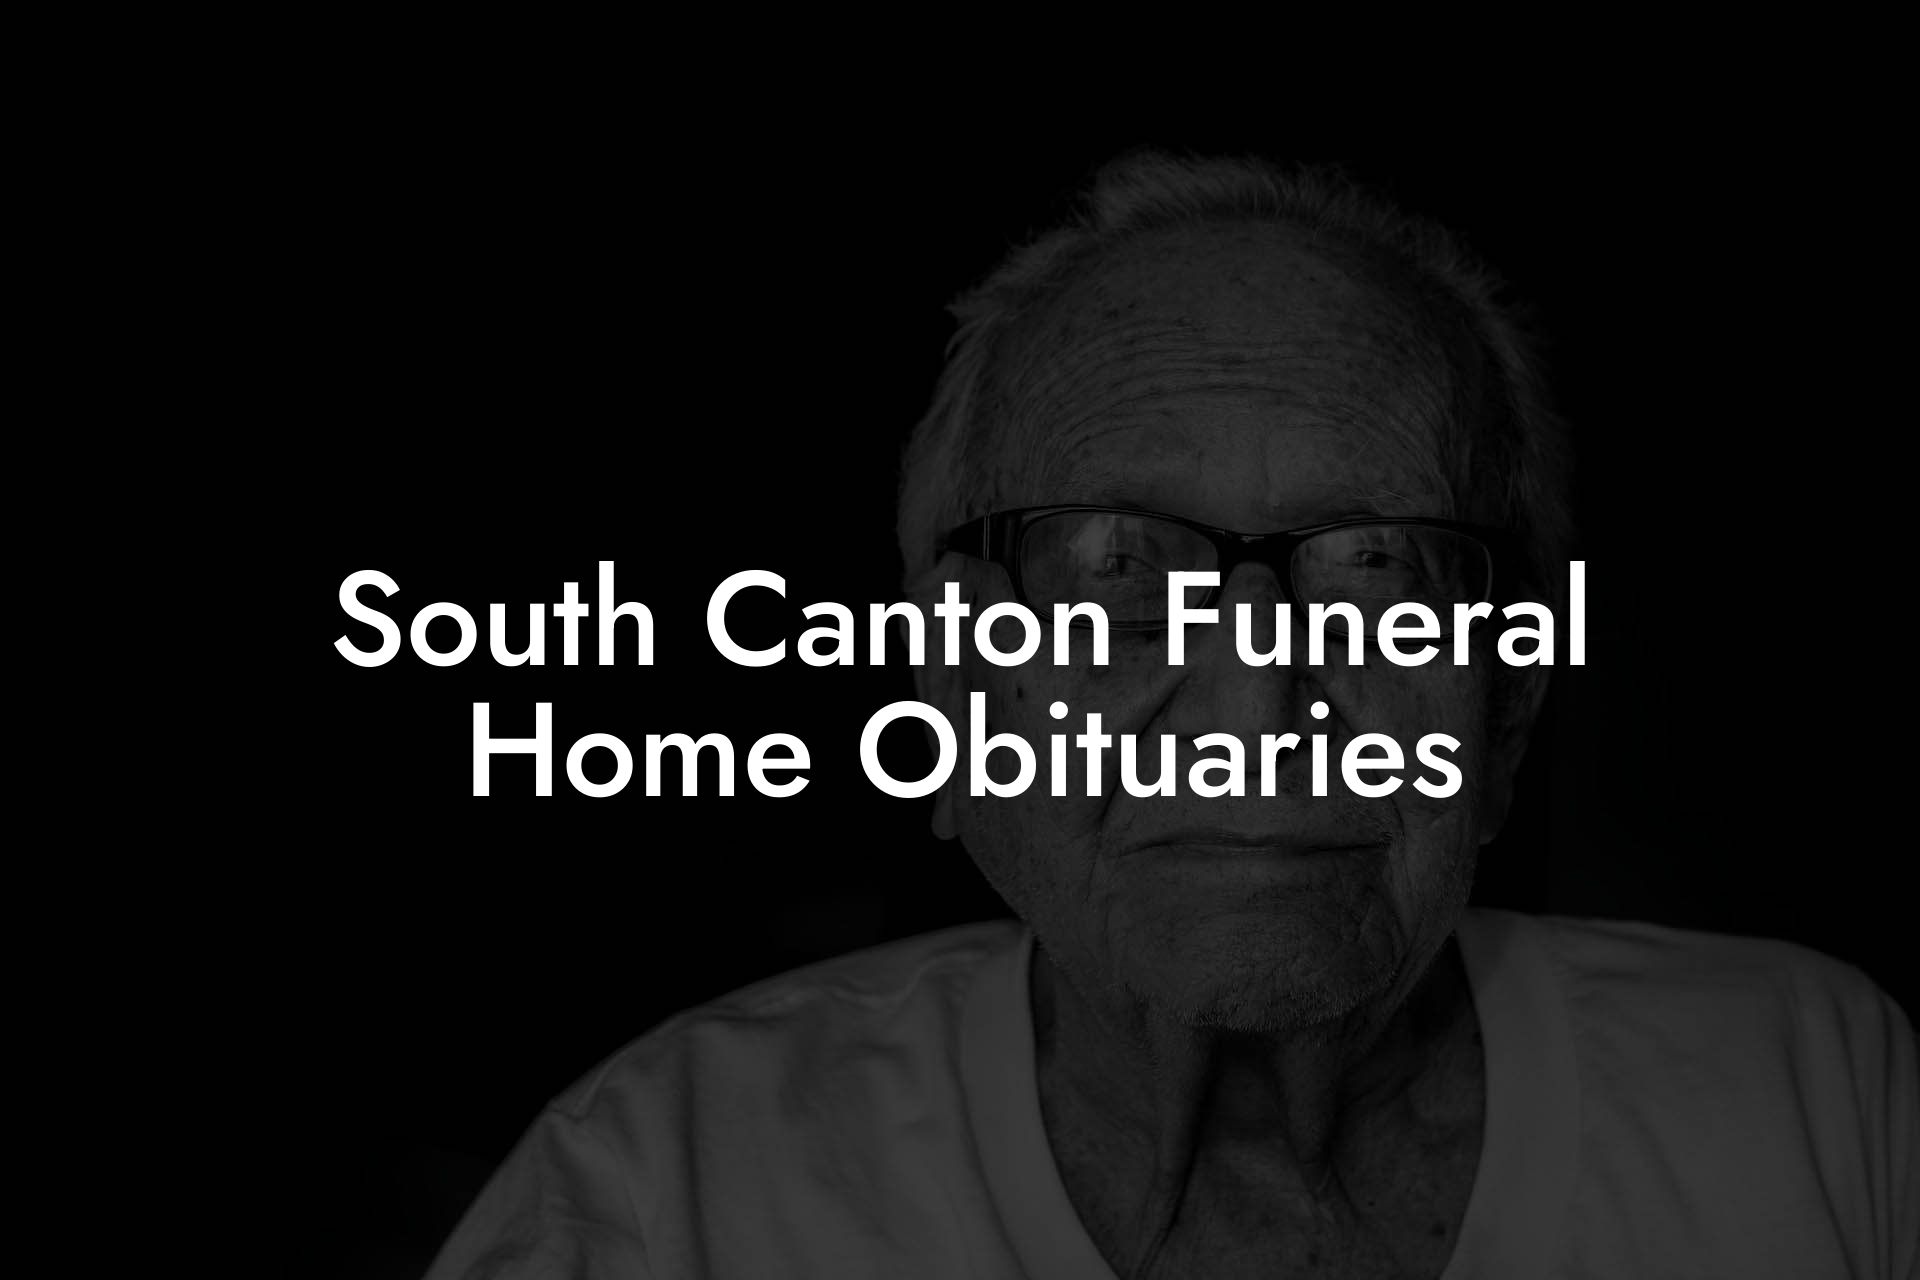 South Canton Funeral Home Obituaries